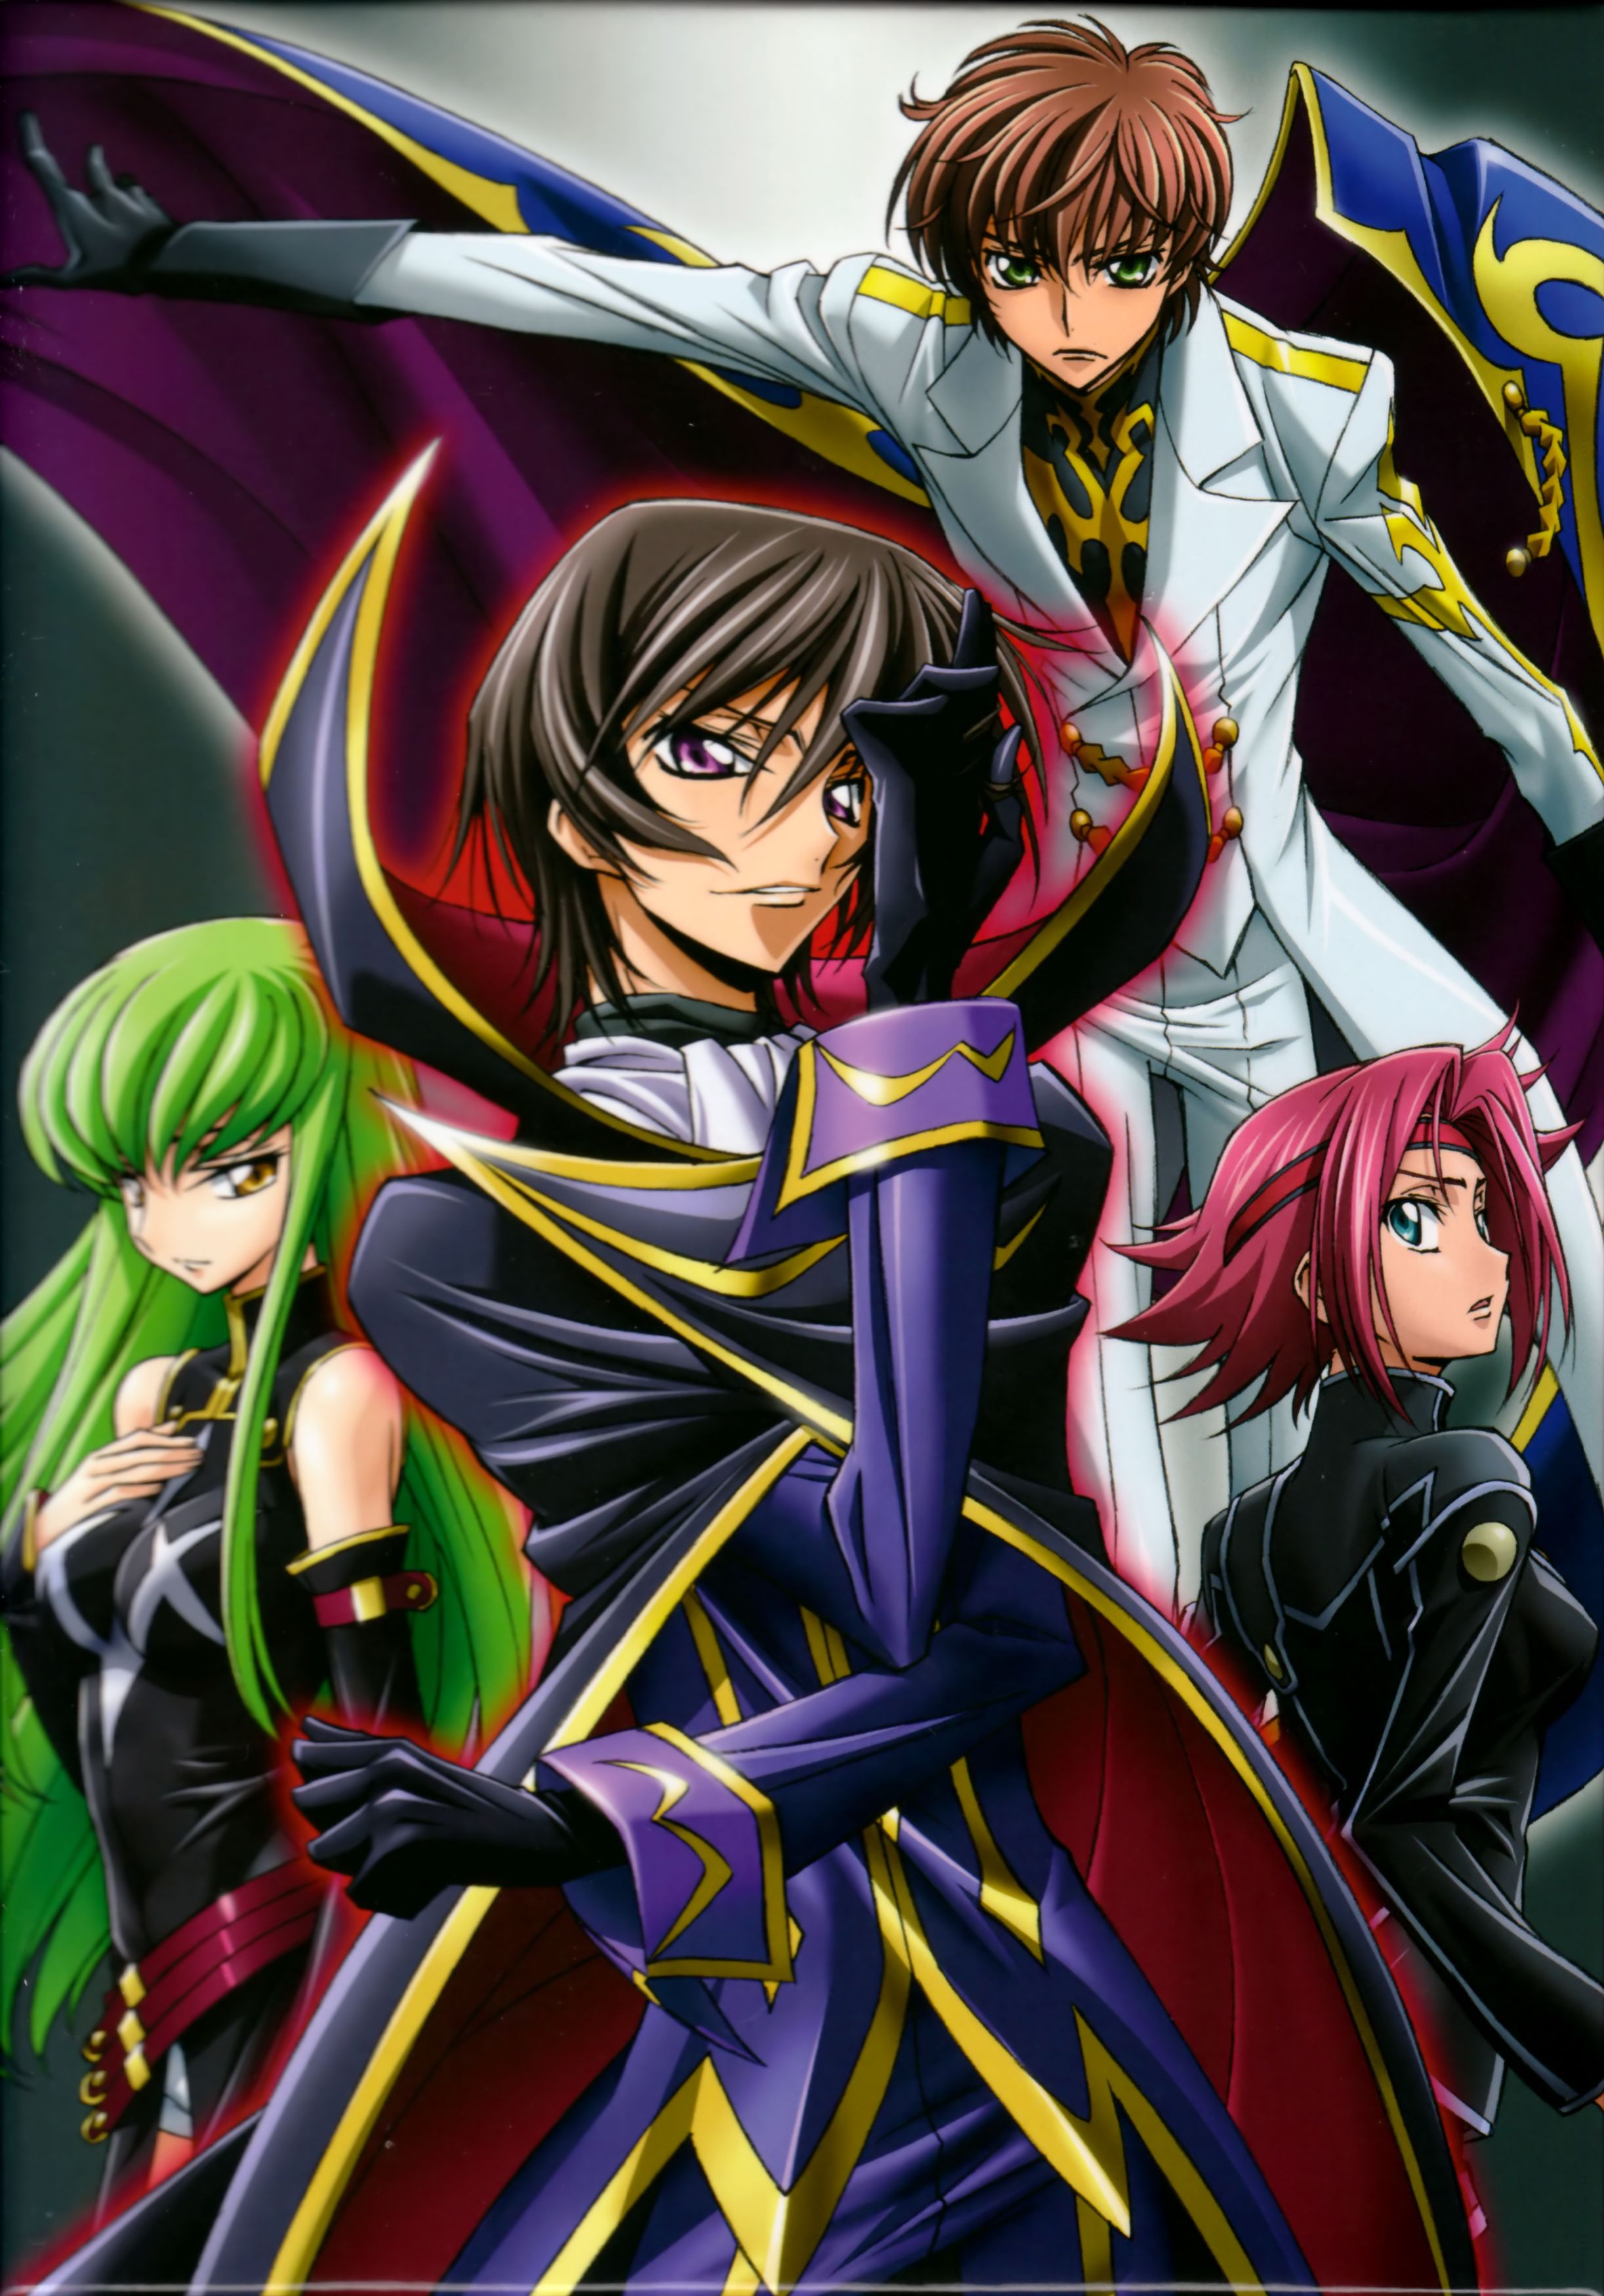 4k Code Geass Android Wallpapers - Wallpaper Cave